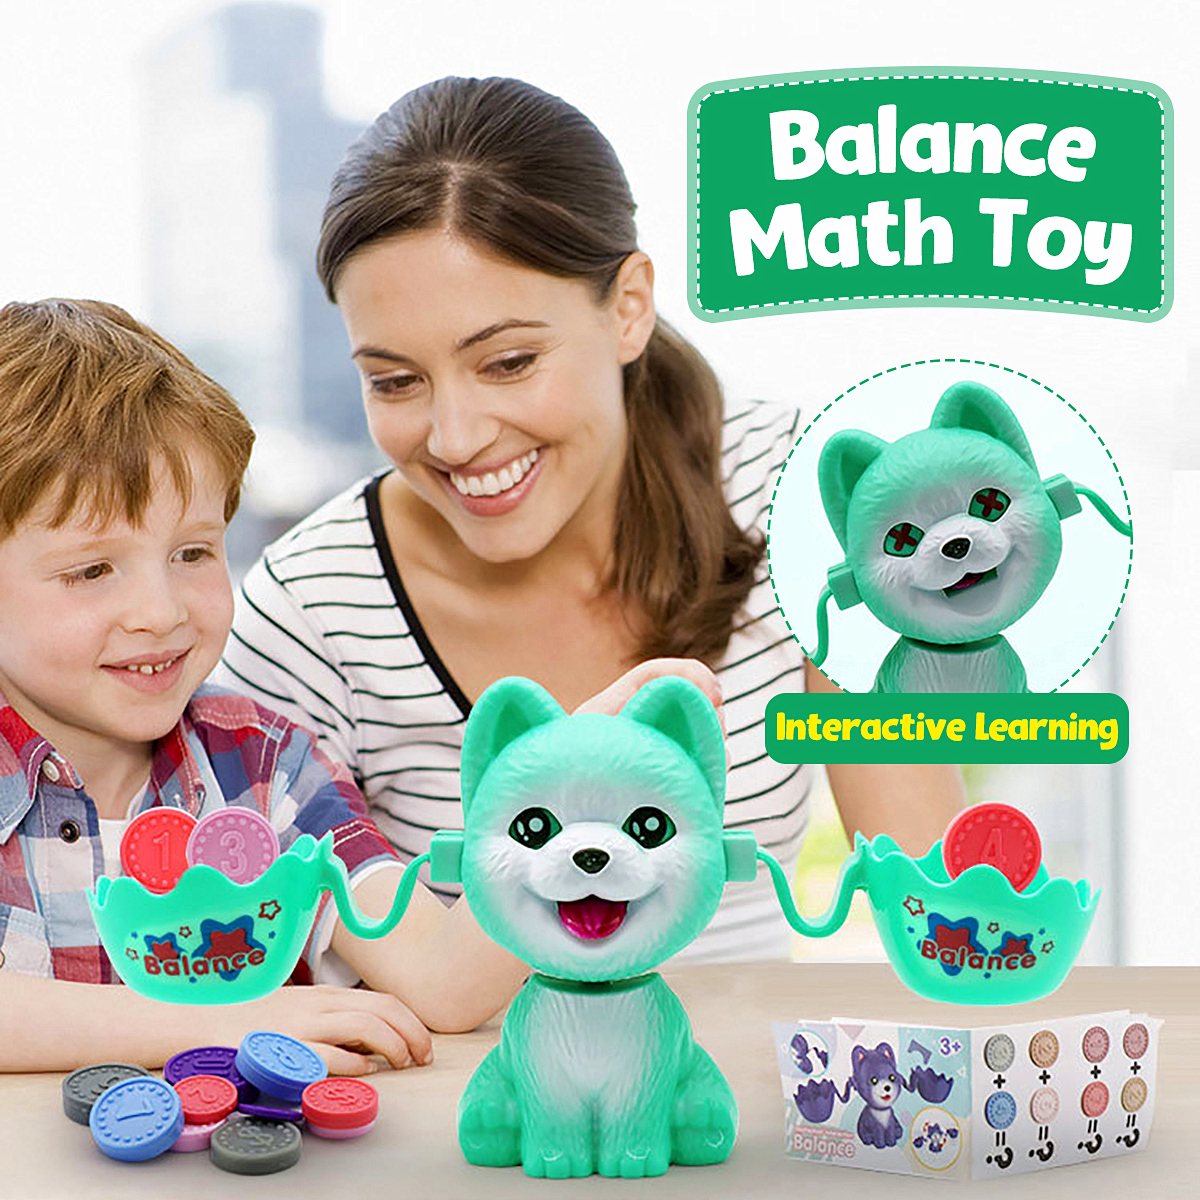 Puppy-Balance-Educational-Learn-Intellectual-Interaction-Counting-Numbers-and-Basic-Math-Game-Toys-f-1671977-1